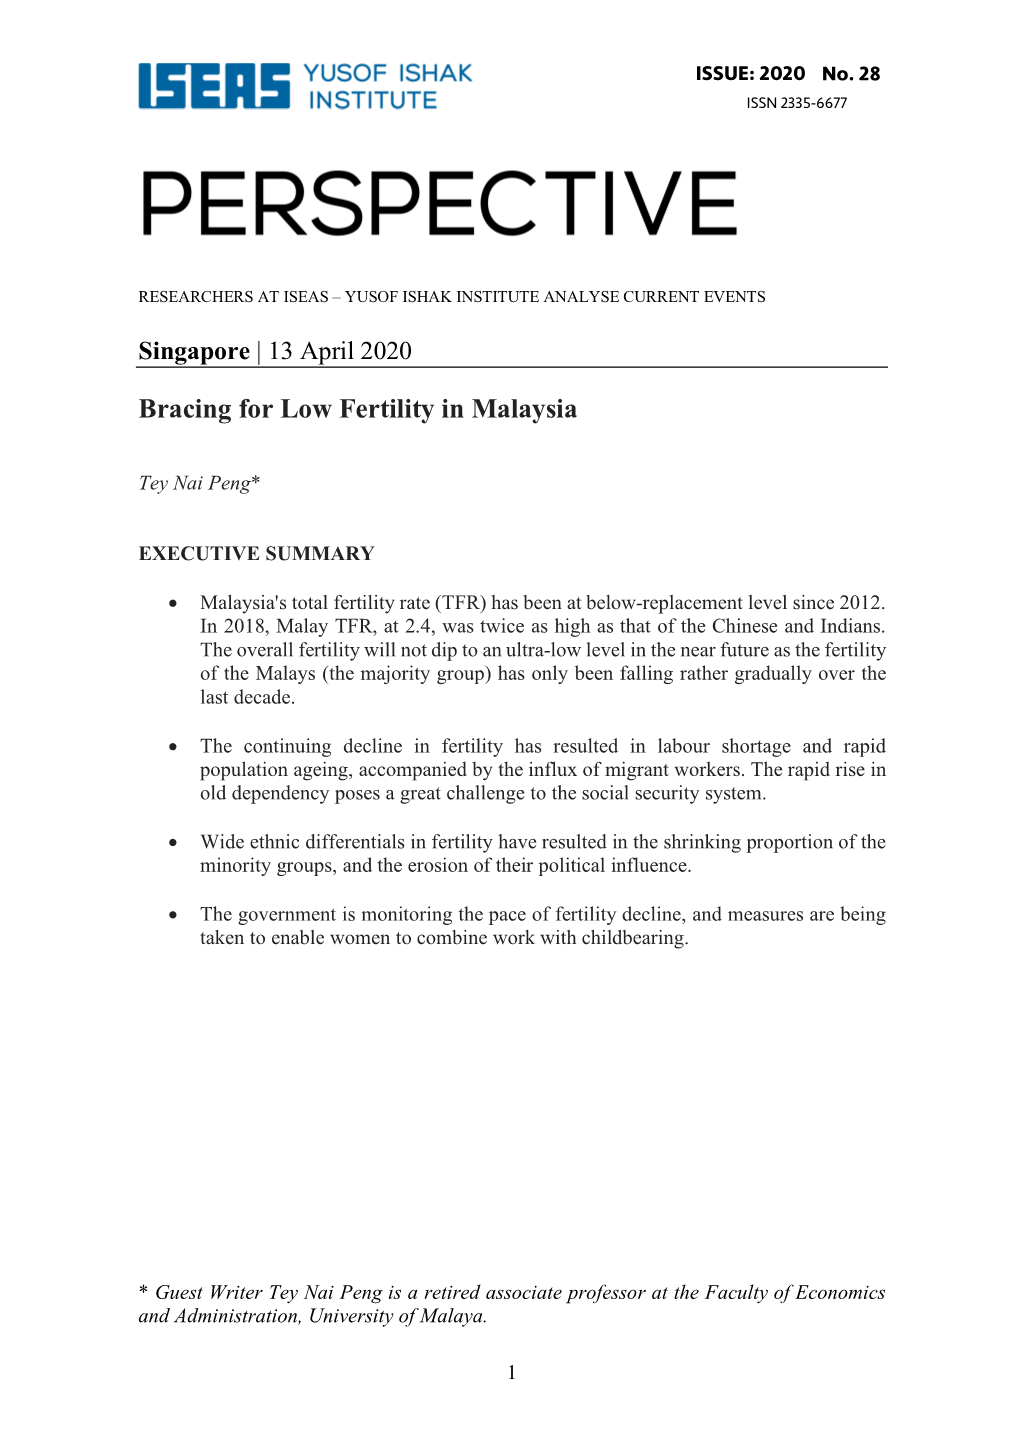 Bracing for Low Fertility in Malaysia